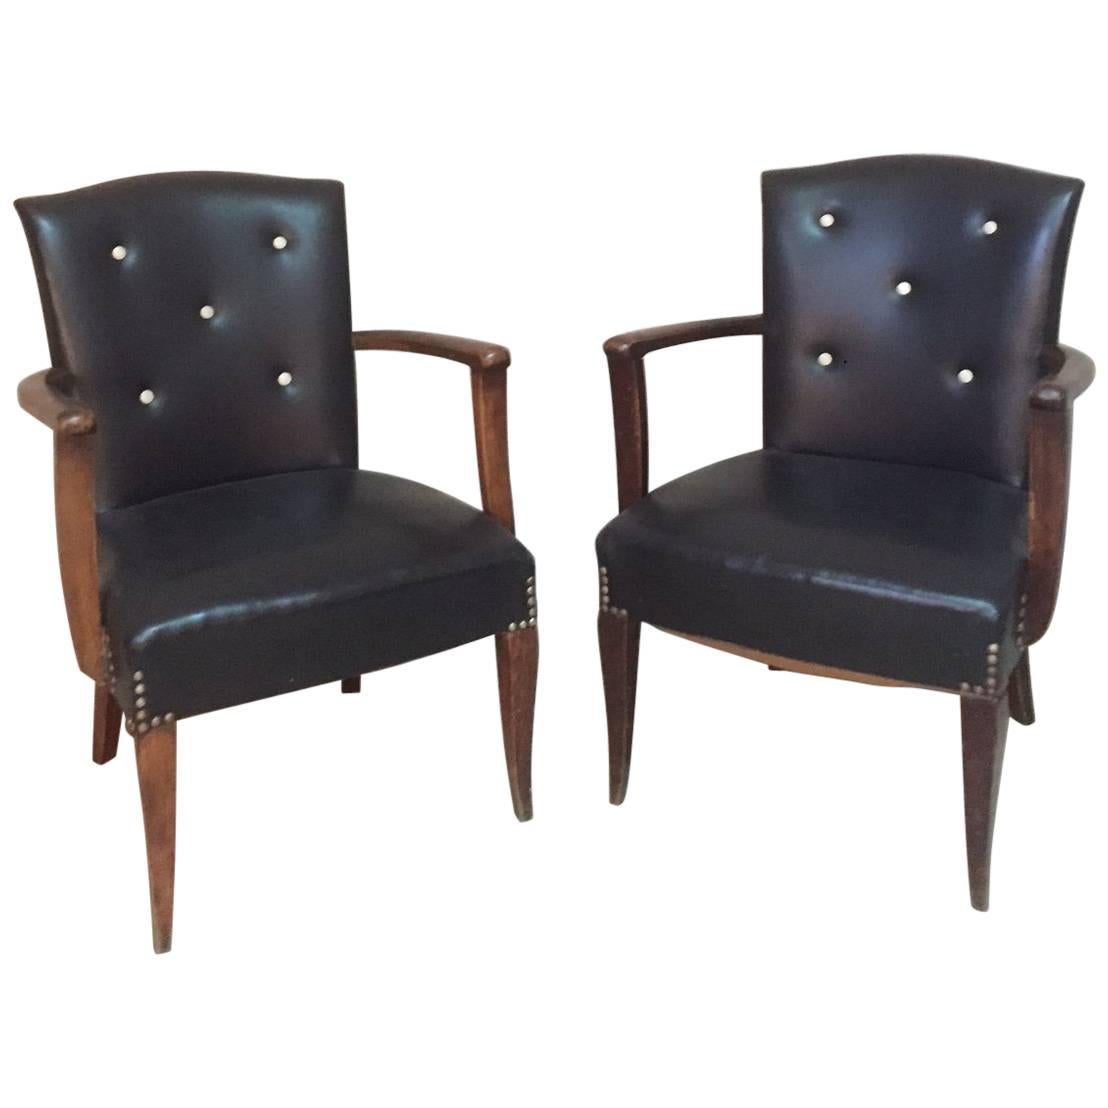 Pair of Black Leatherette Lounge Chairs, 1940s